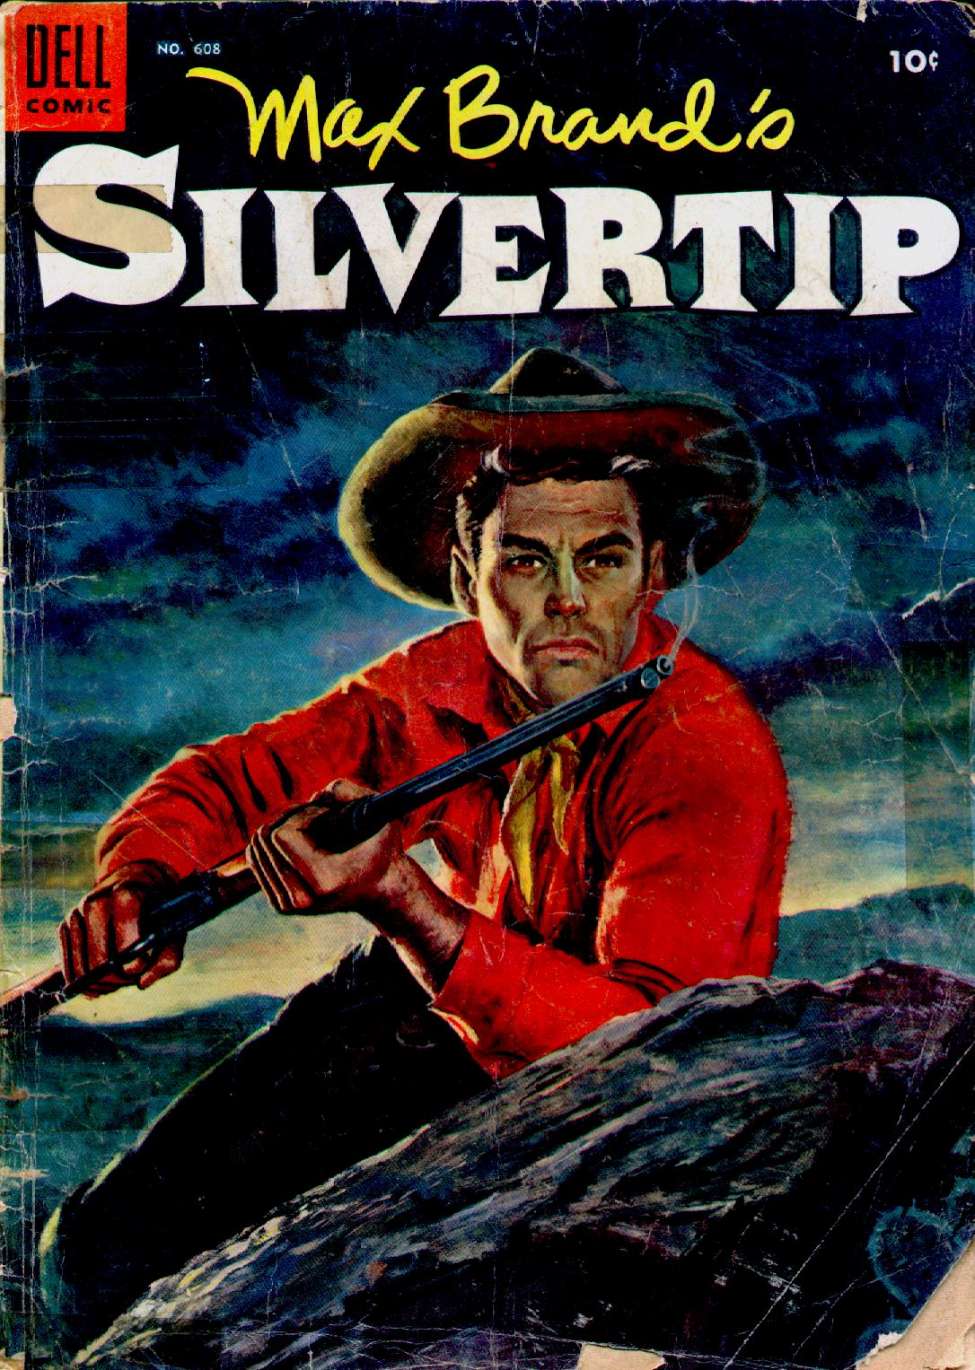 Book Cover For 0608 - Max Brand's Silvertip